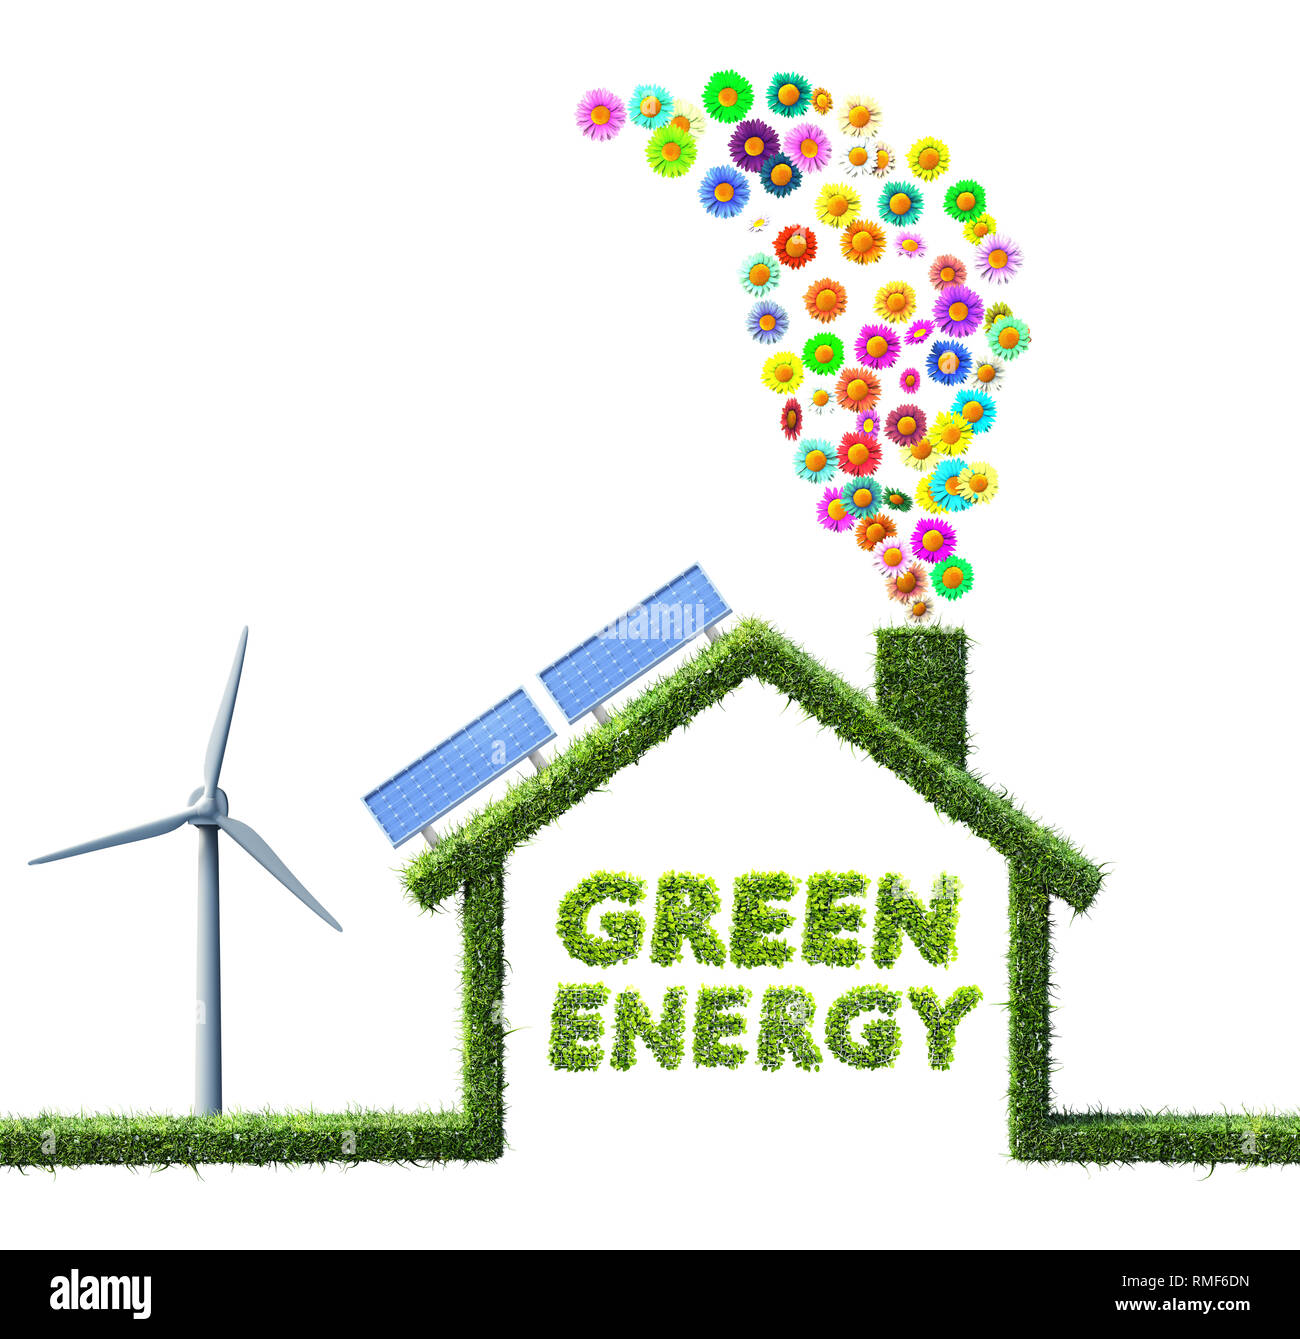 eco house and green energy concept made of grass 3D illustration Stock Photo